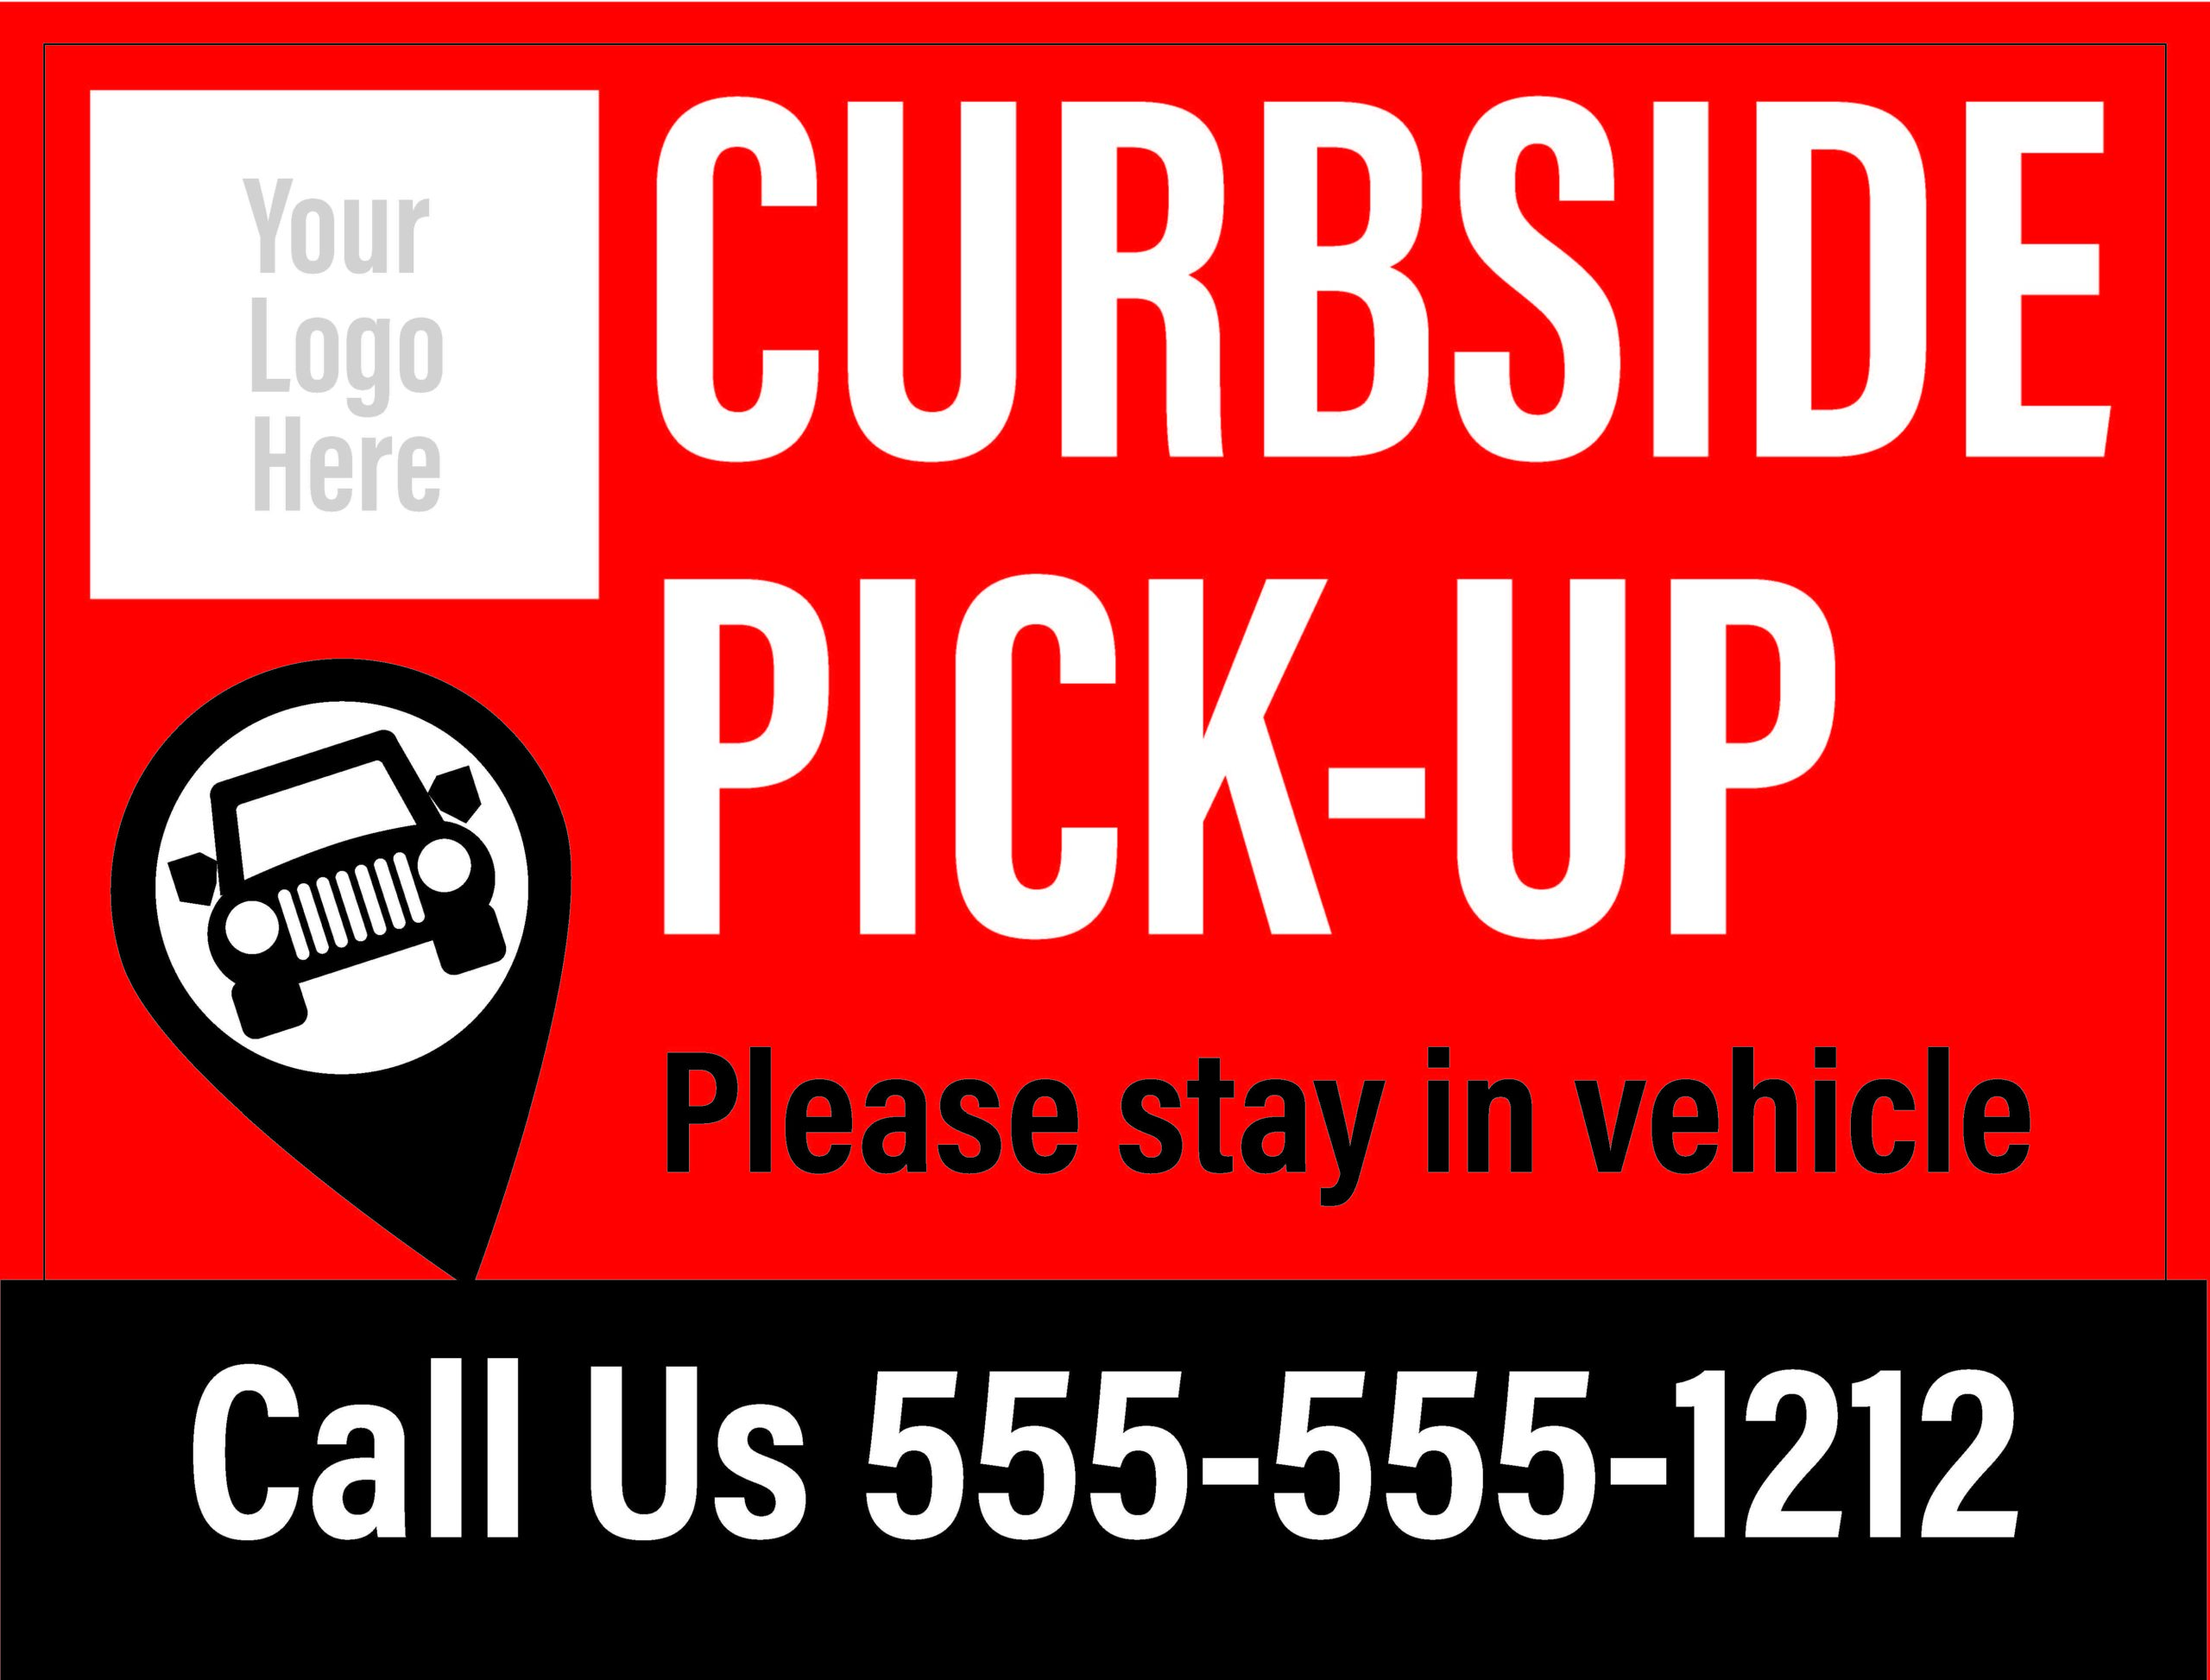 Curbside Pickup Signs 24”x 18”, printed on White Coroplast (outside)